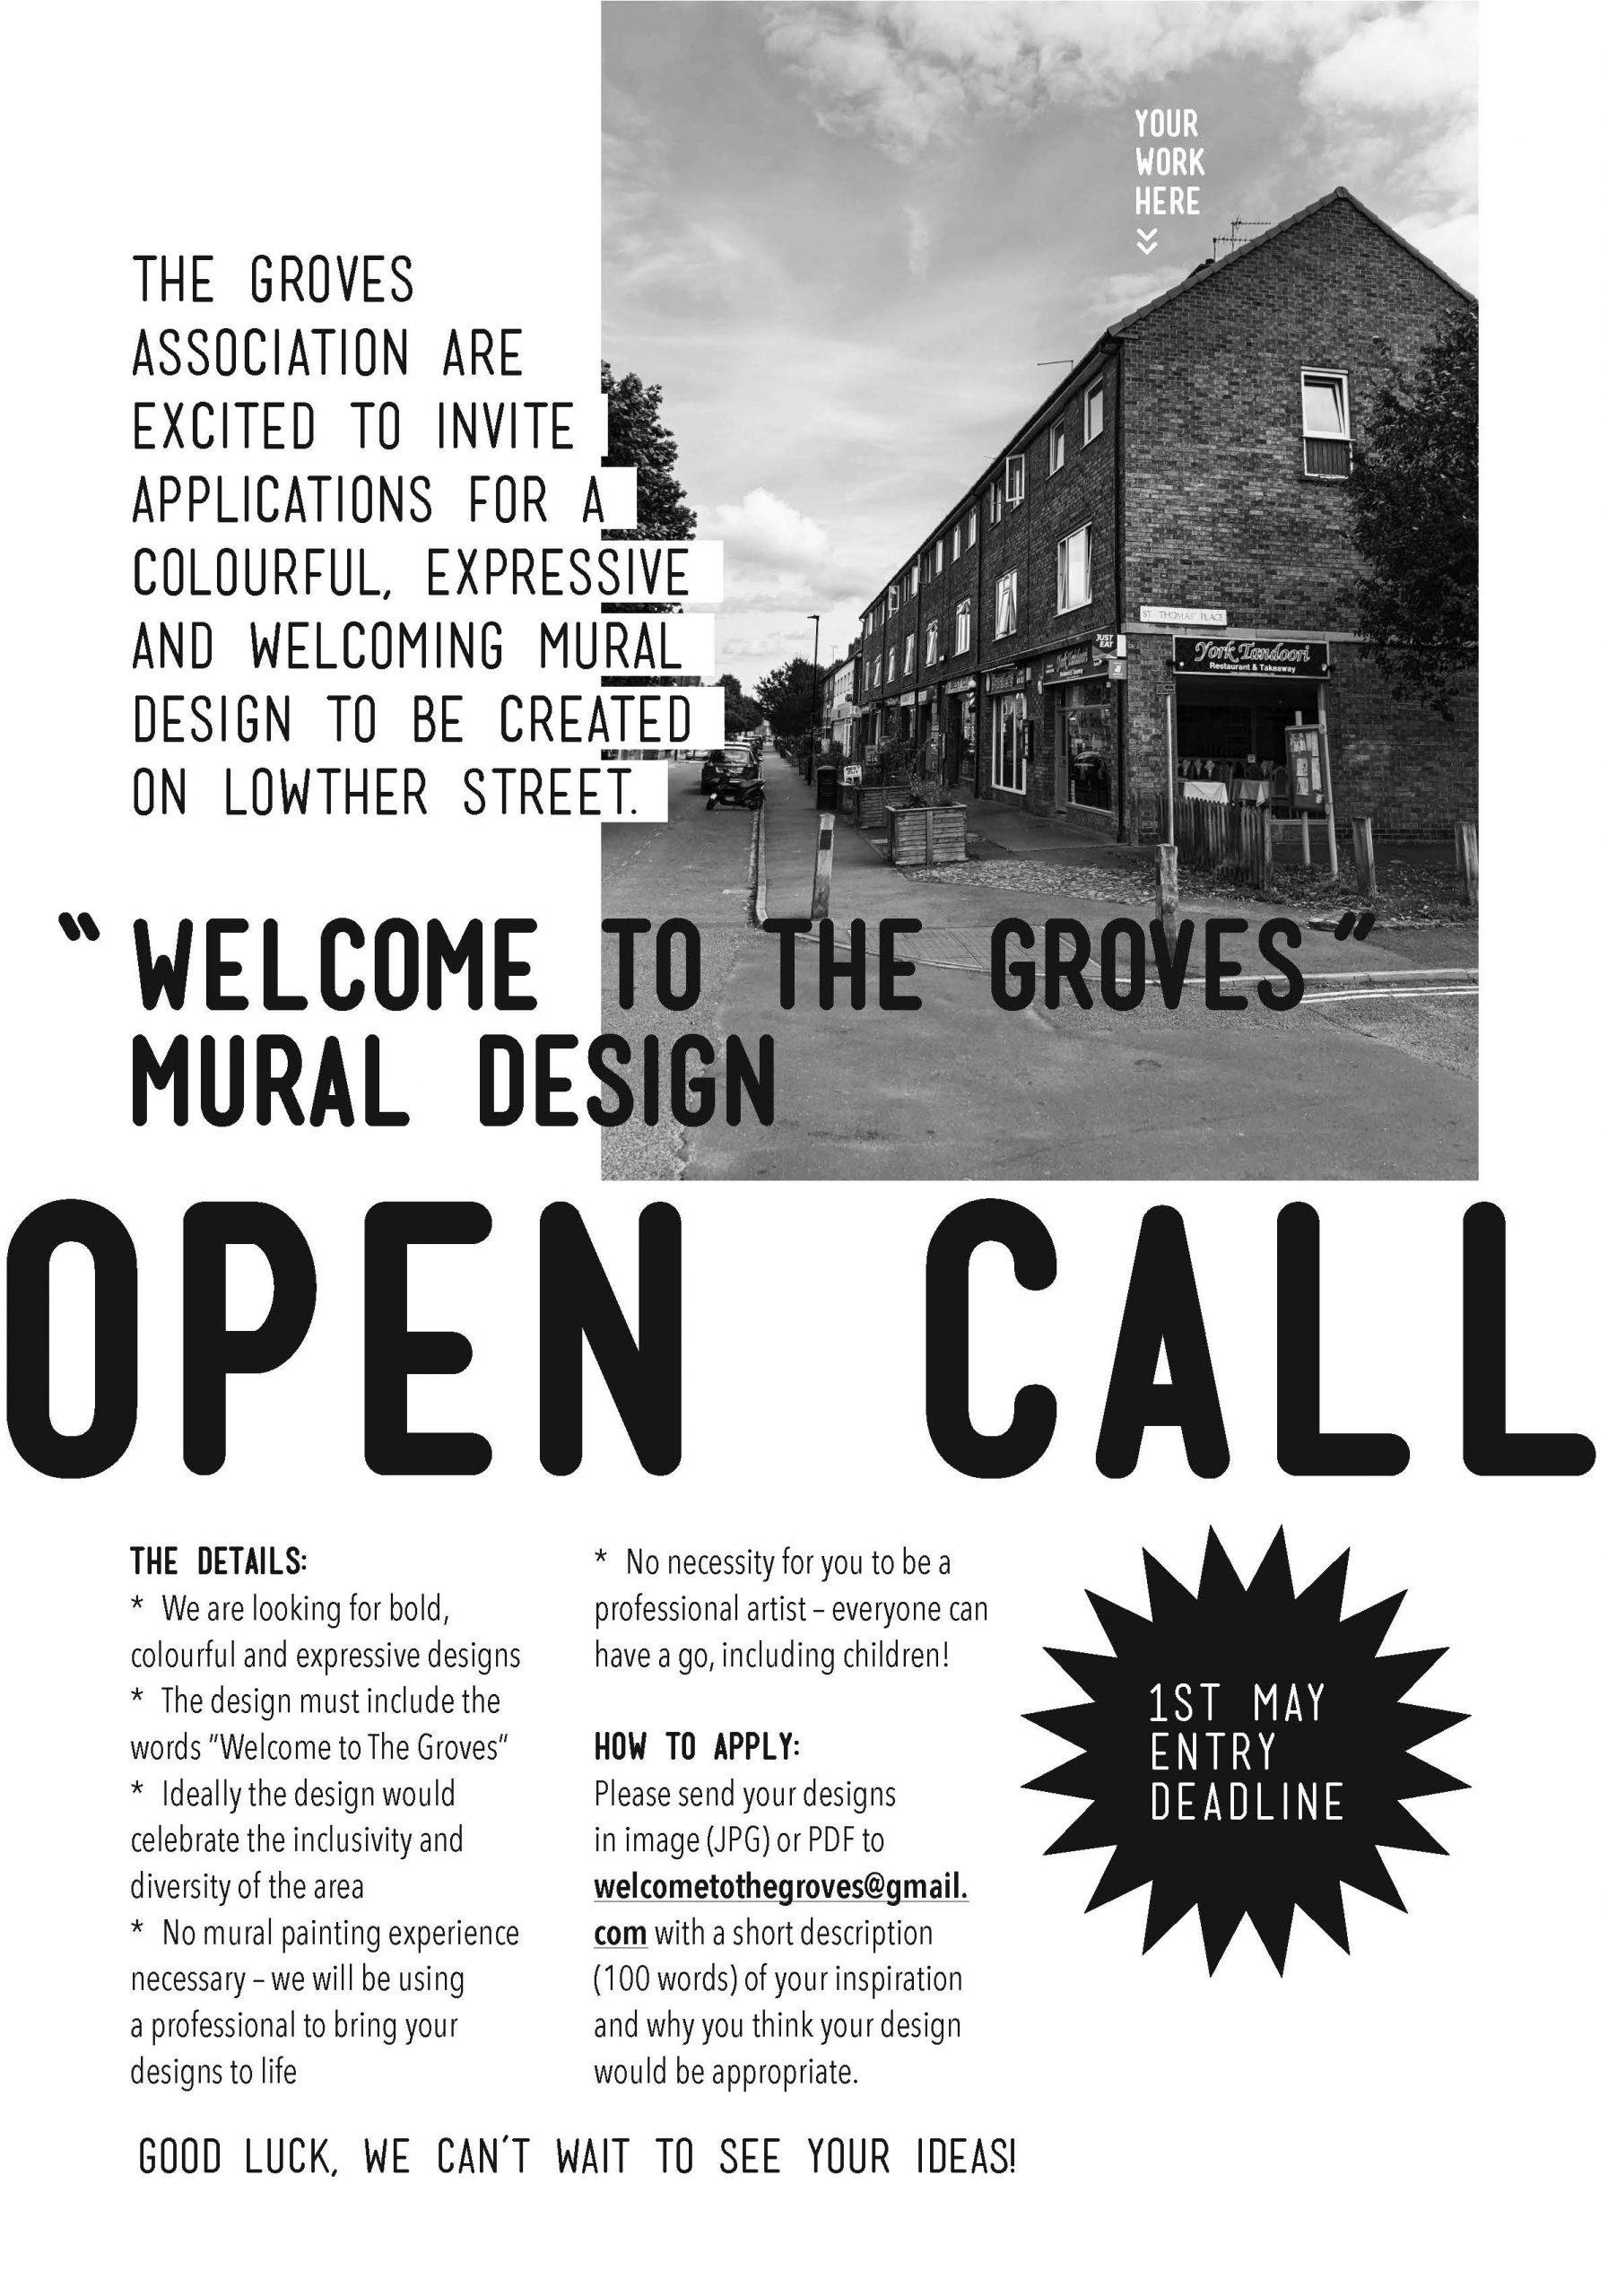 Image descriptionImage of a a5 flyer - text reads OPEN CALL “ WELCOME TO THE GROVES” MURAL DESIGN The Groves Association are excited to invite applications for a colourful, expressive and welcoming mural design to be created on Lowther Street. The Details: We are looking for bold, colourful and expressive designs The design must include the words “Welcome to The Groves” Ideally the design would celebrate the inclusivity and diversity of the area No mural painting experience necessary – we will be using a professional to bring your designs to life No necessity for you to be a professional artist – everyone can have a go, including children! How to Apply: Please send your designs in image (JPG) or PDF to welcometothegroves@gmail.com with a short description (100 words) f your inspiration and why you think your design would be appropriate.